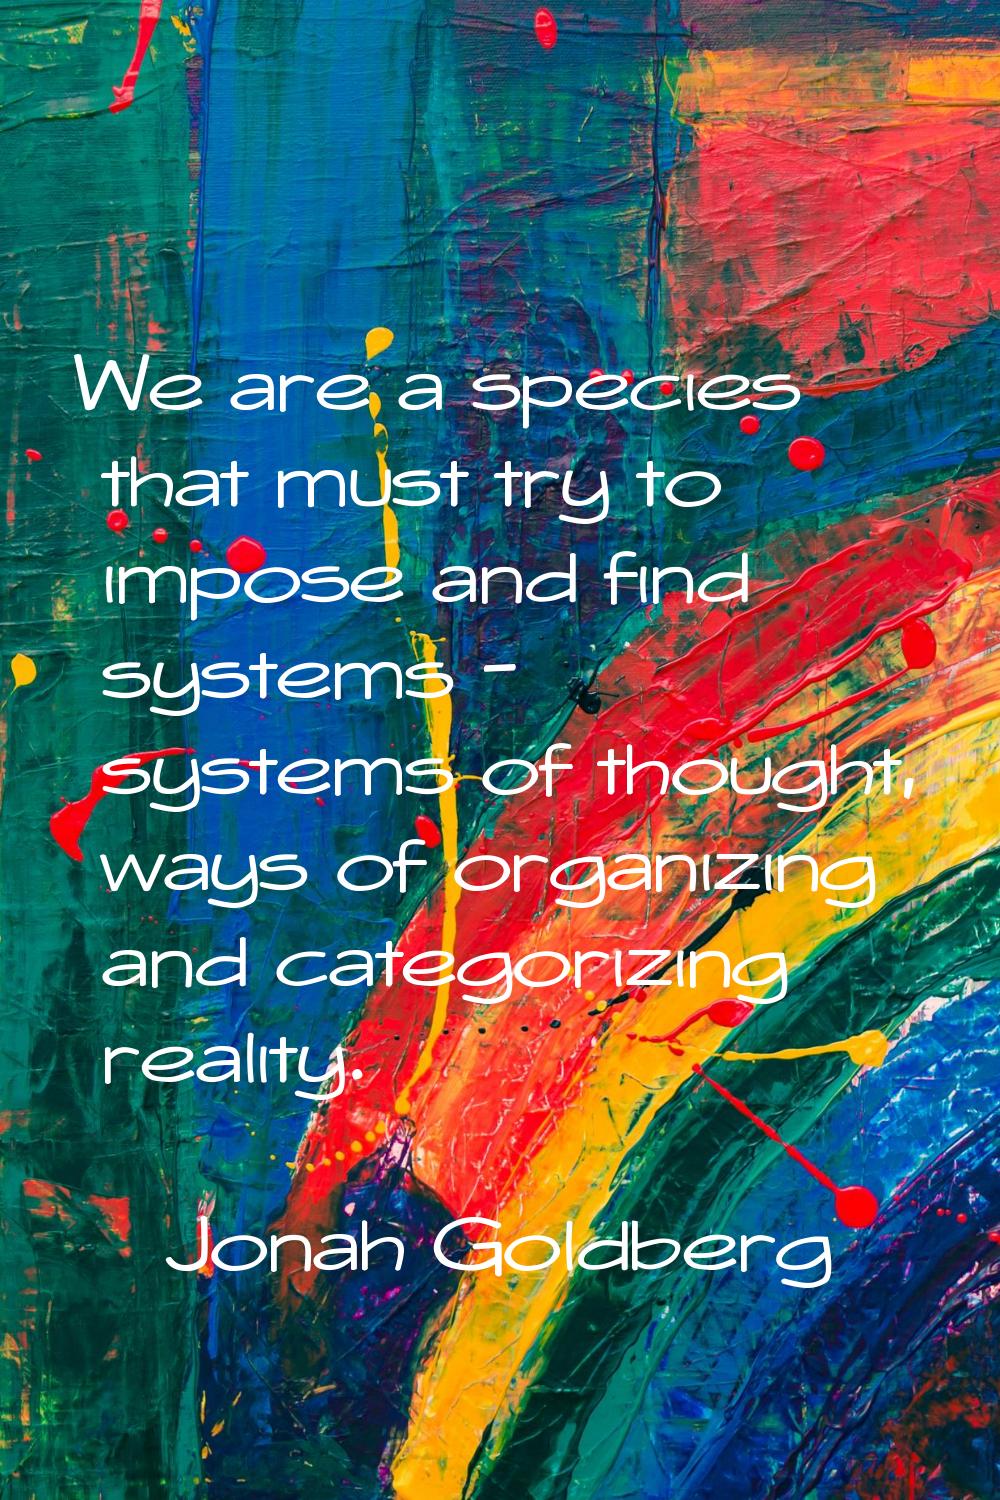 We are a species that must try to impose and find systems - systems of thought, ways of organizing 